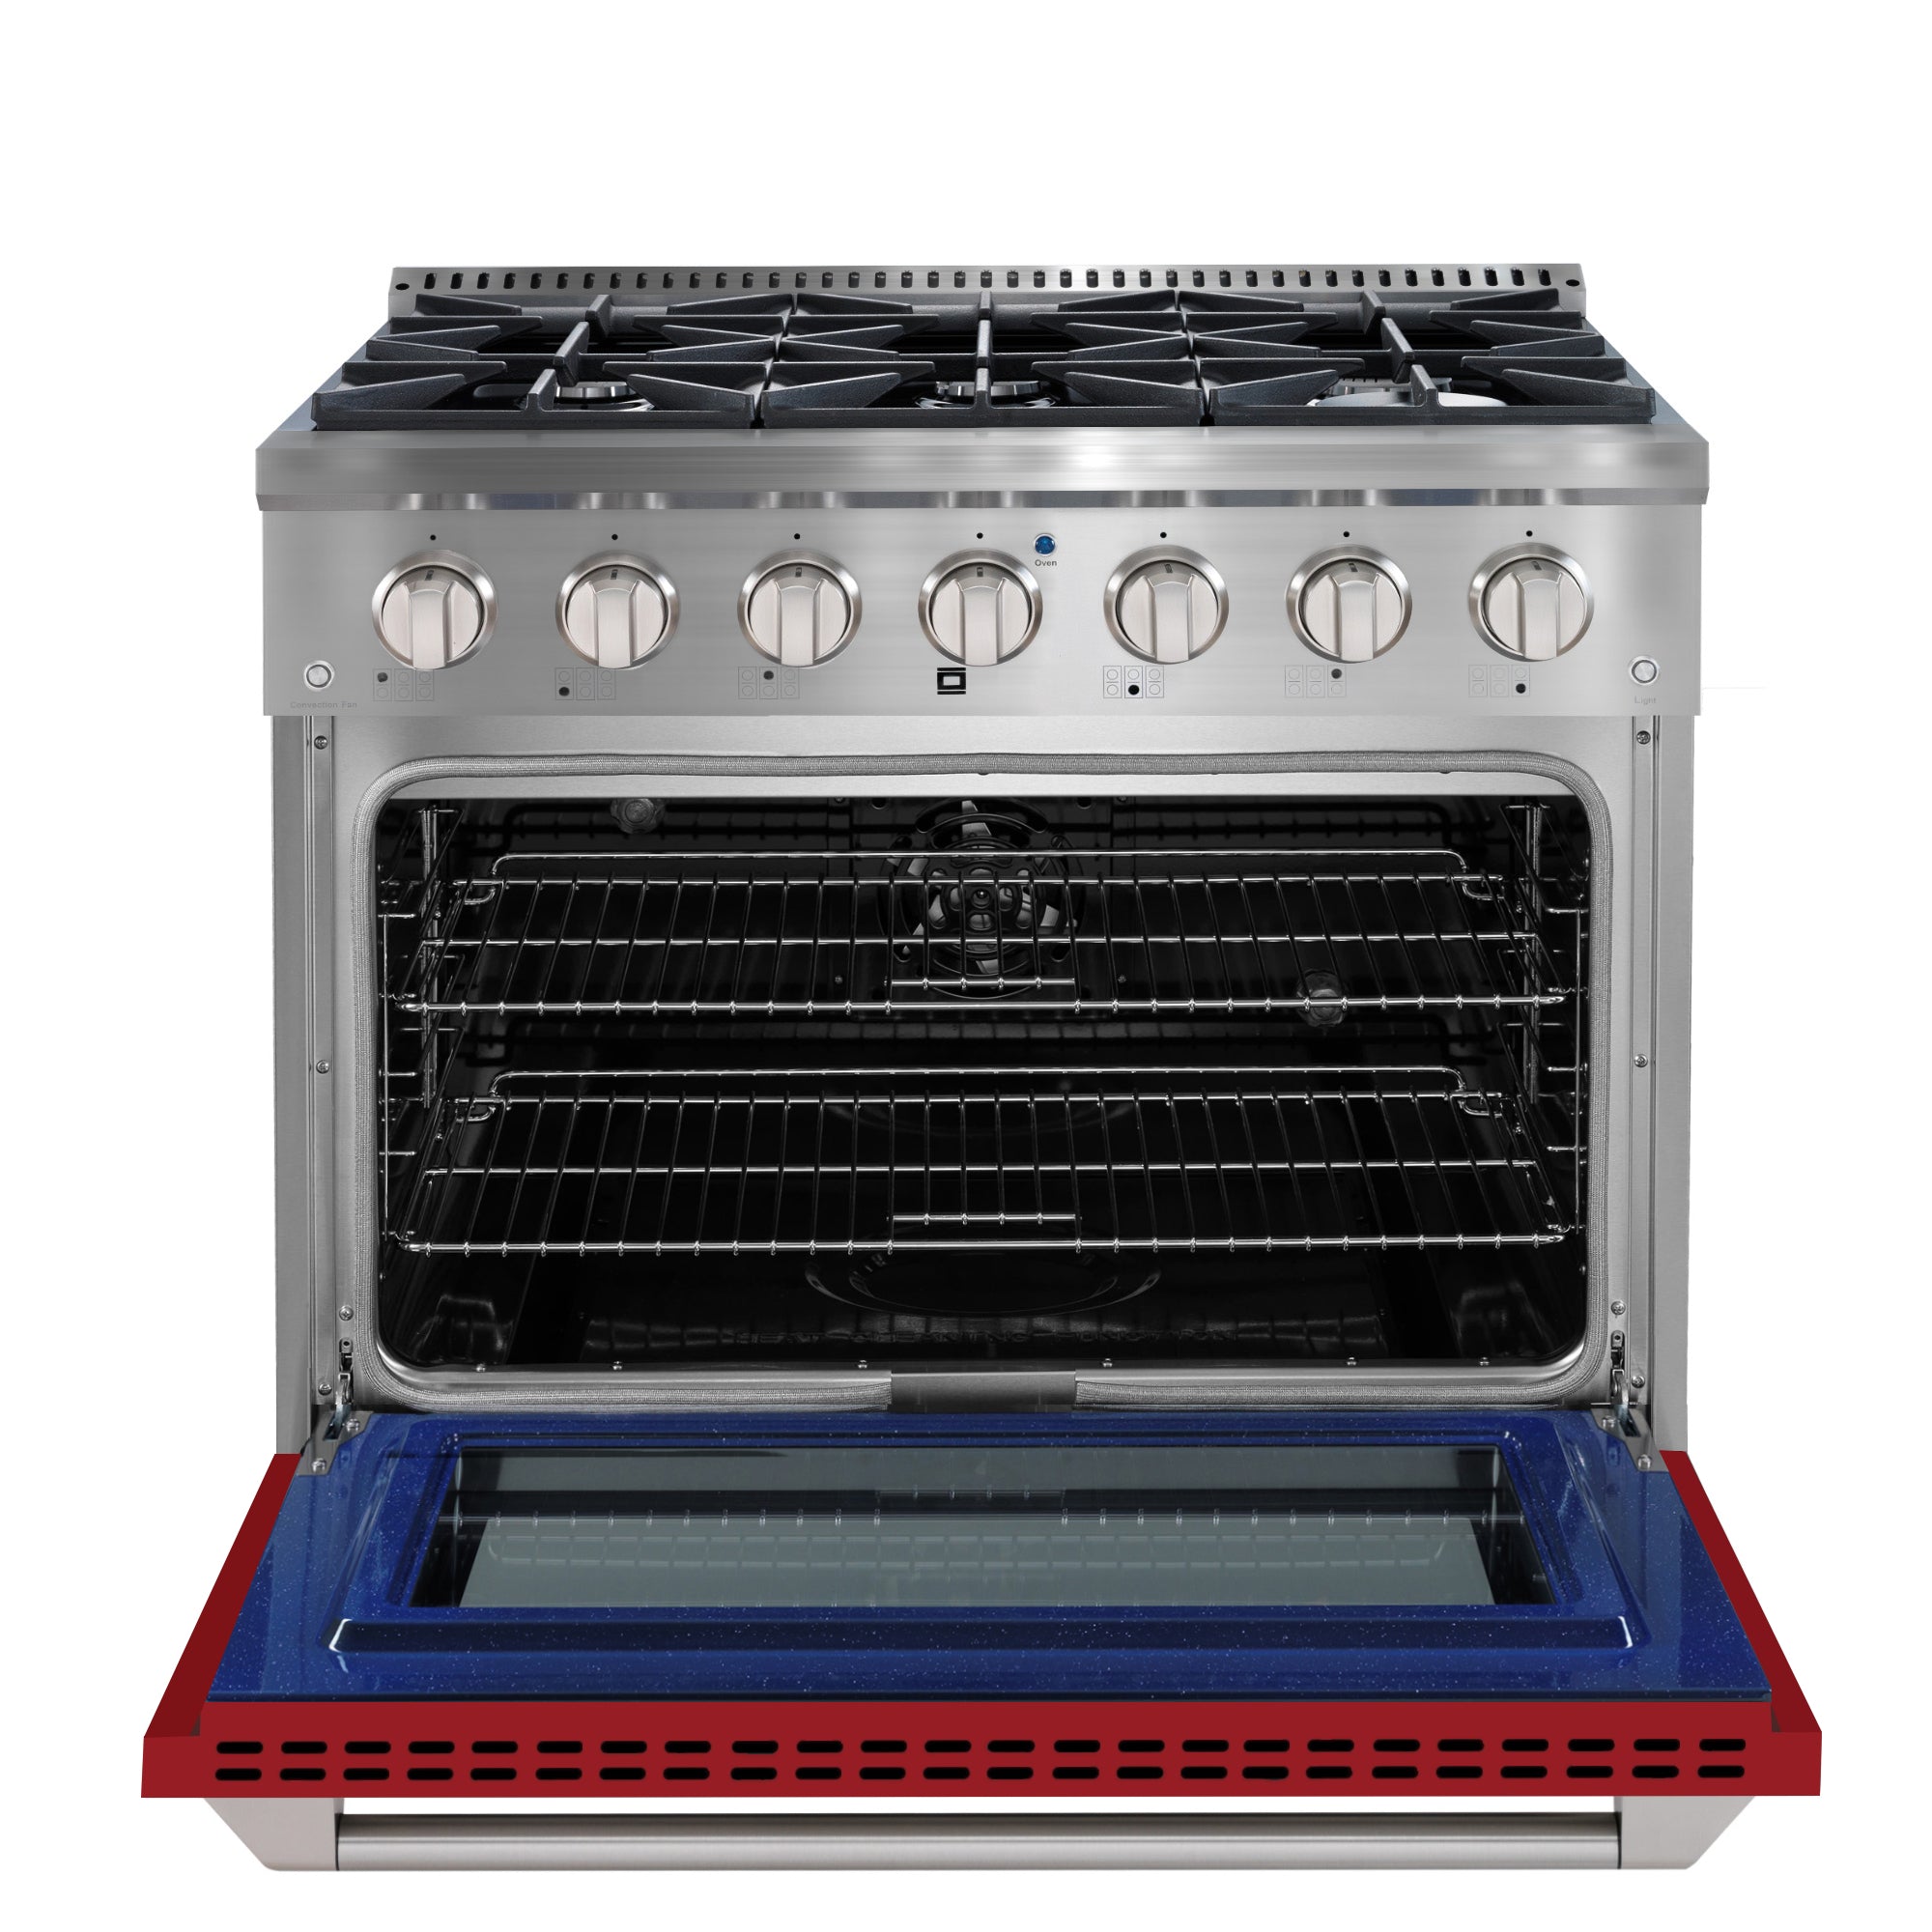 Ancona 36” 5.2 cu. ft. Dual Fuel Range with 6 Burners and Convection Oven in Stainless Steel with Red Door